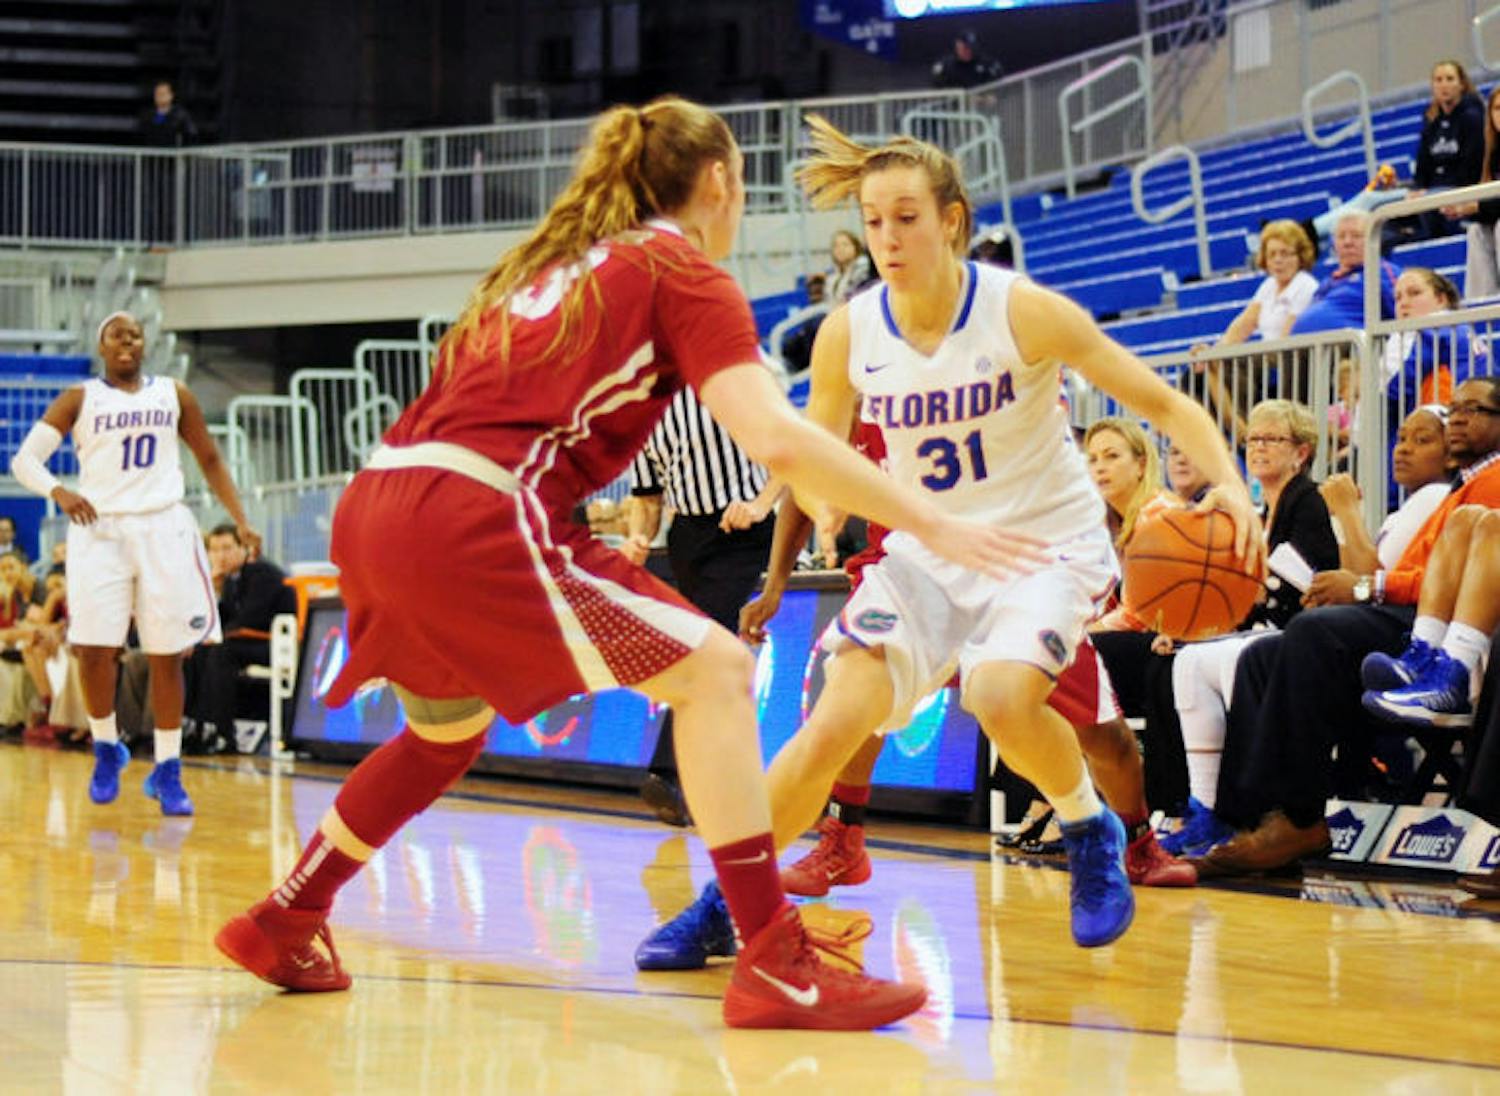 Lily Svete drives toward the net during Florida’s 75-67 win against Alabama on Thursday in the O’Connell Center. Svete scored 14 points against the Crimson Tide.